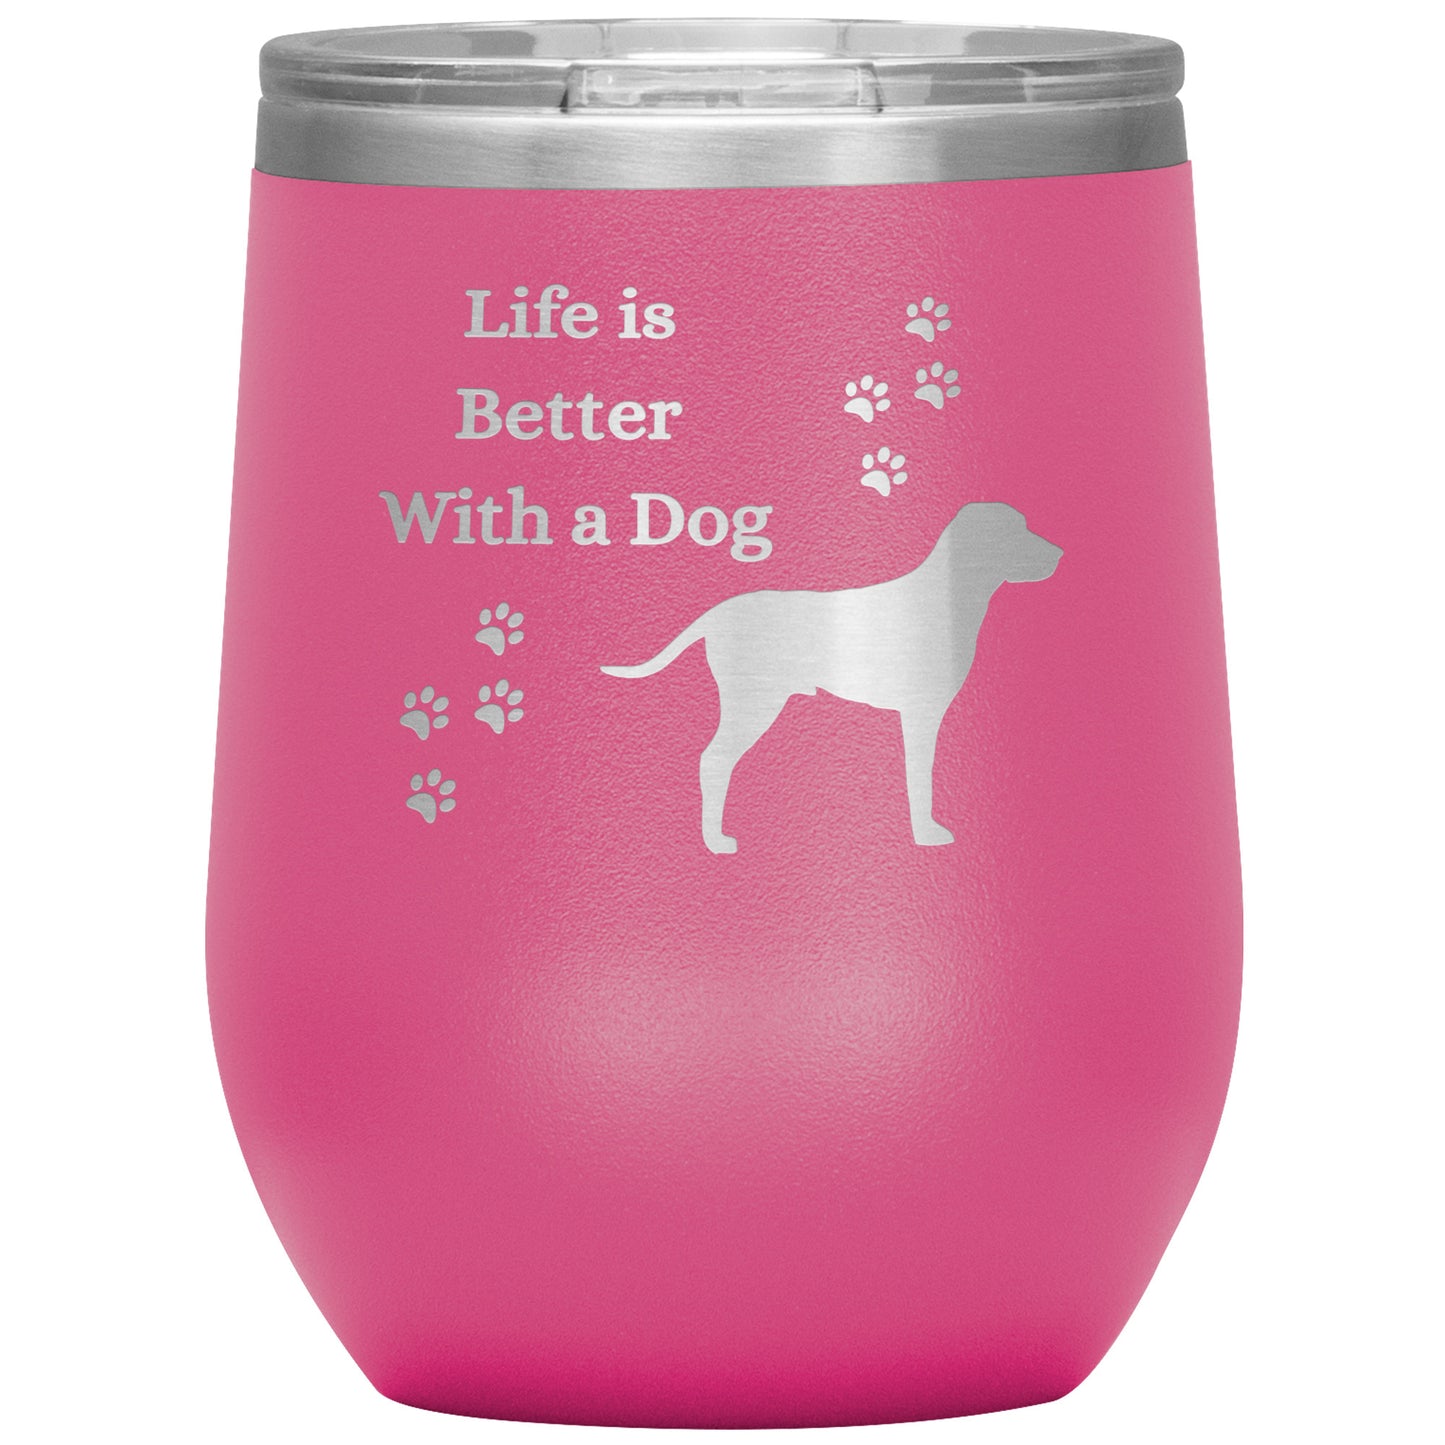 Life is Better With a Dog Wine Tumbler